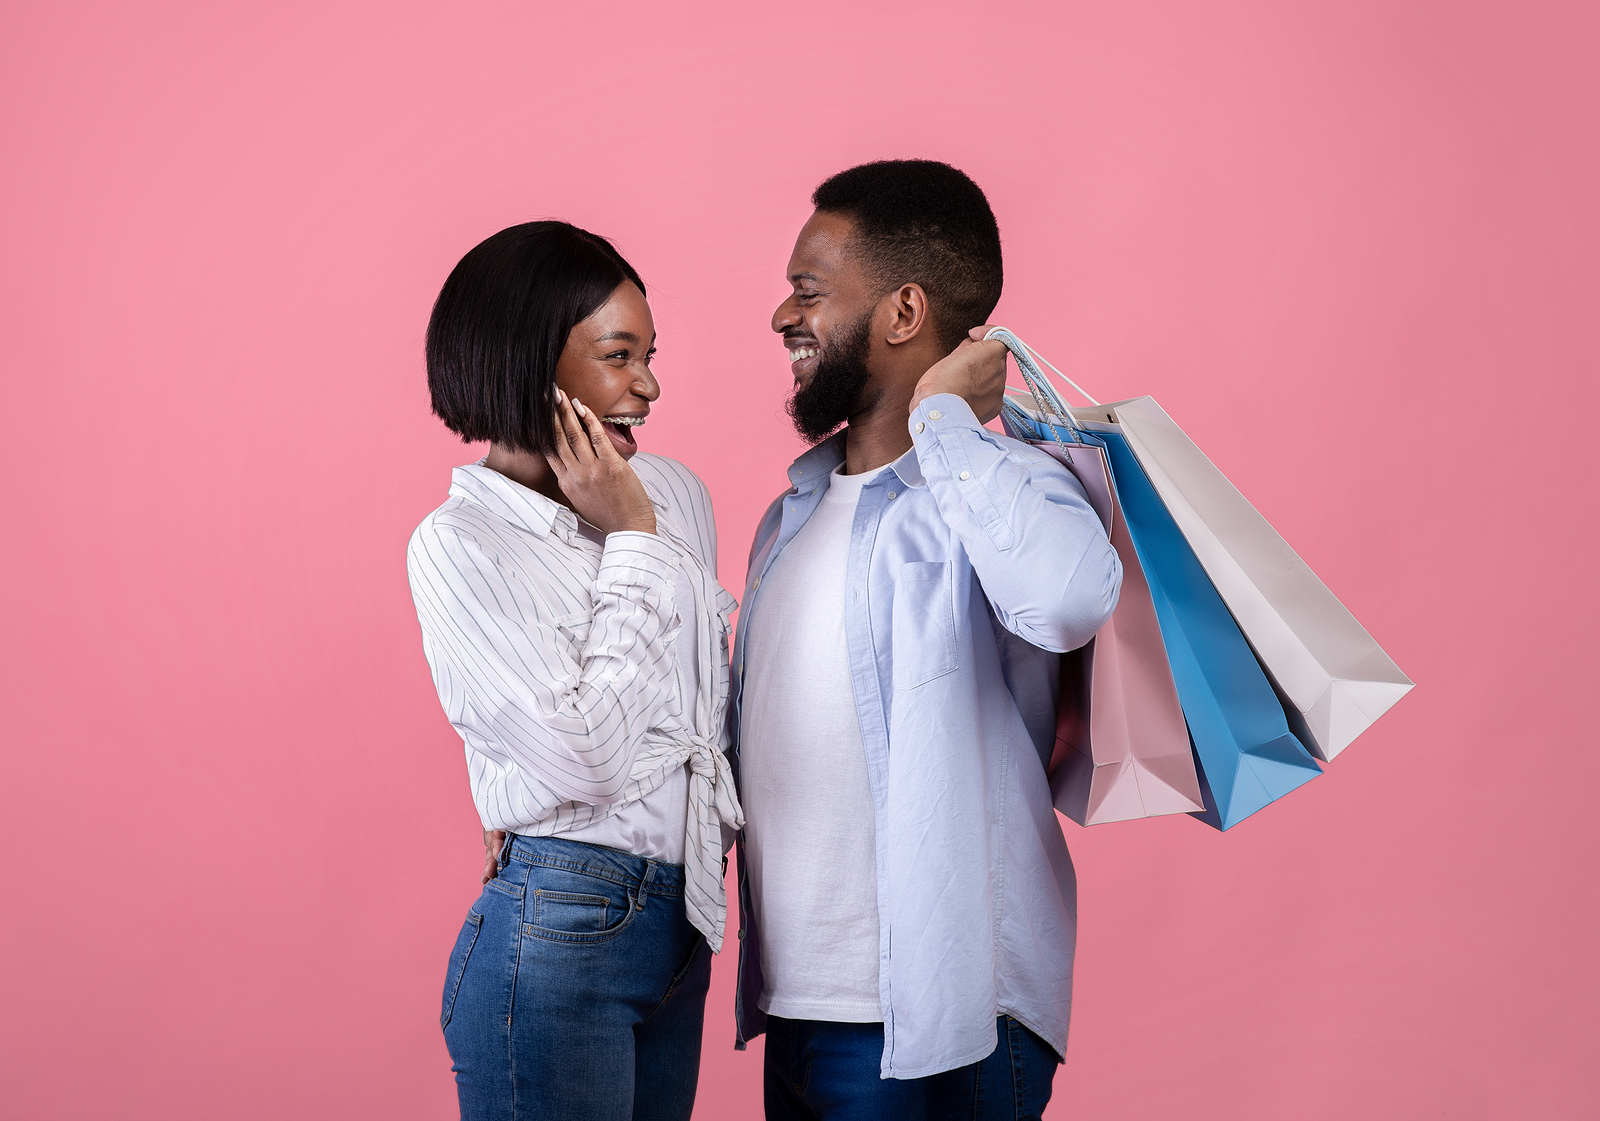 A young black couple smiling facing eachother. She has a surprised expression while he smiles holding shopping bags behind his back.